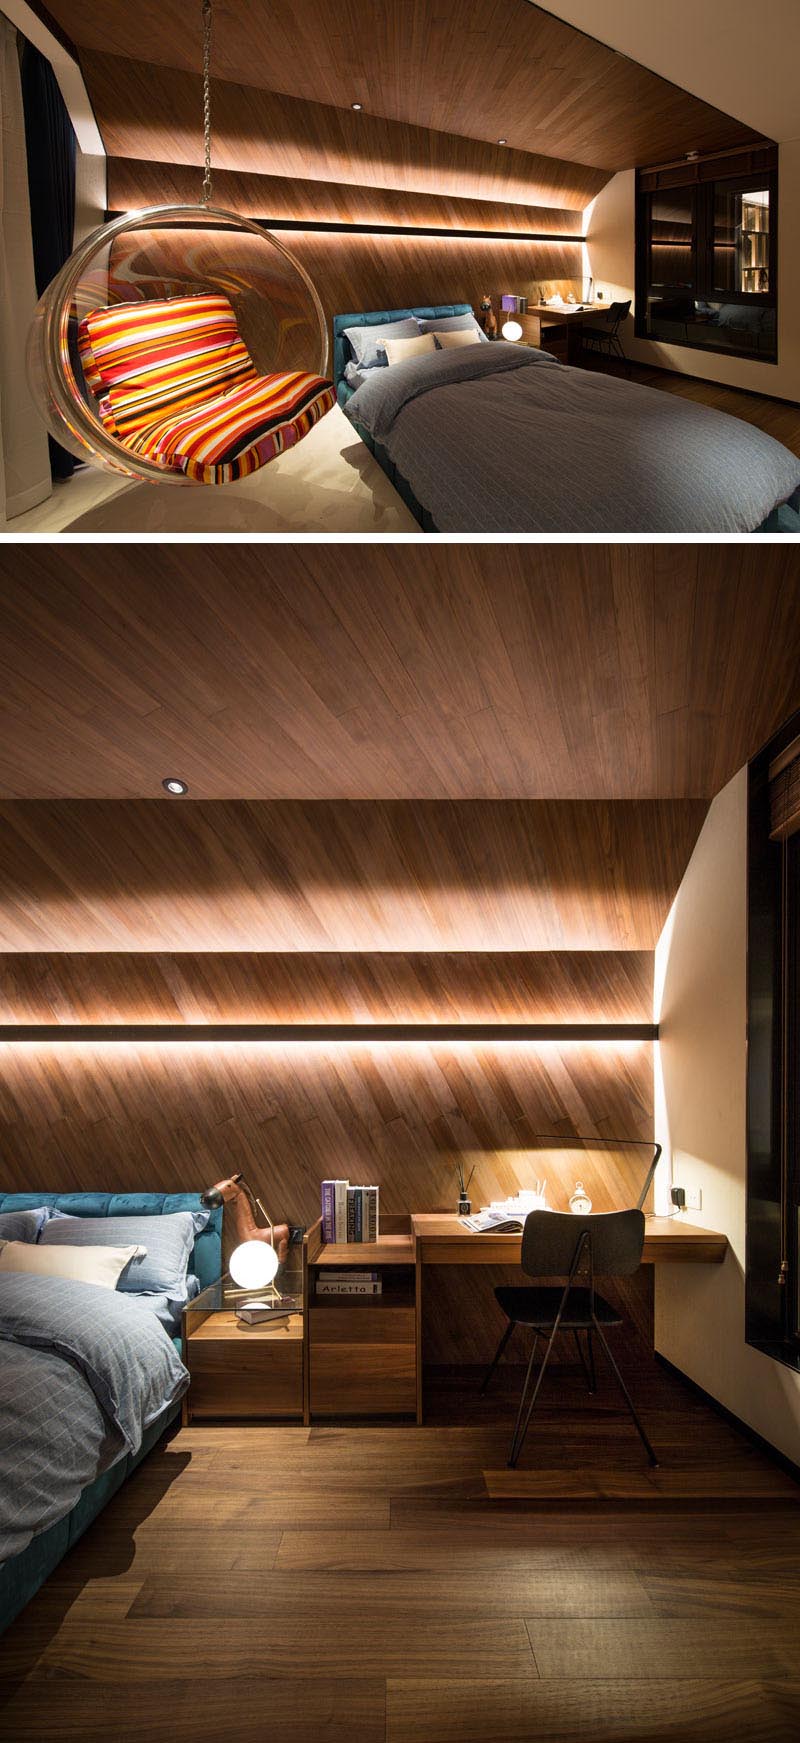 Bedroom Lighting Ideas - A modern bedroom with a wood accent wall that showcases hidden LED lighting.